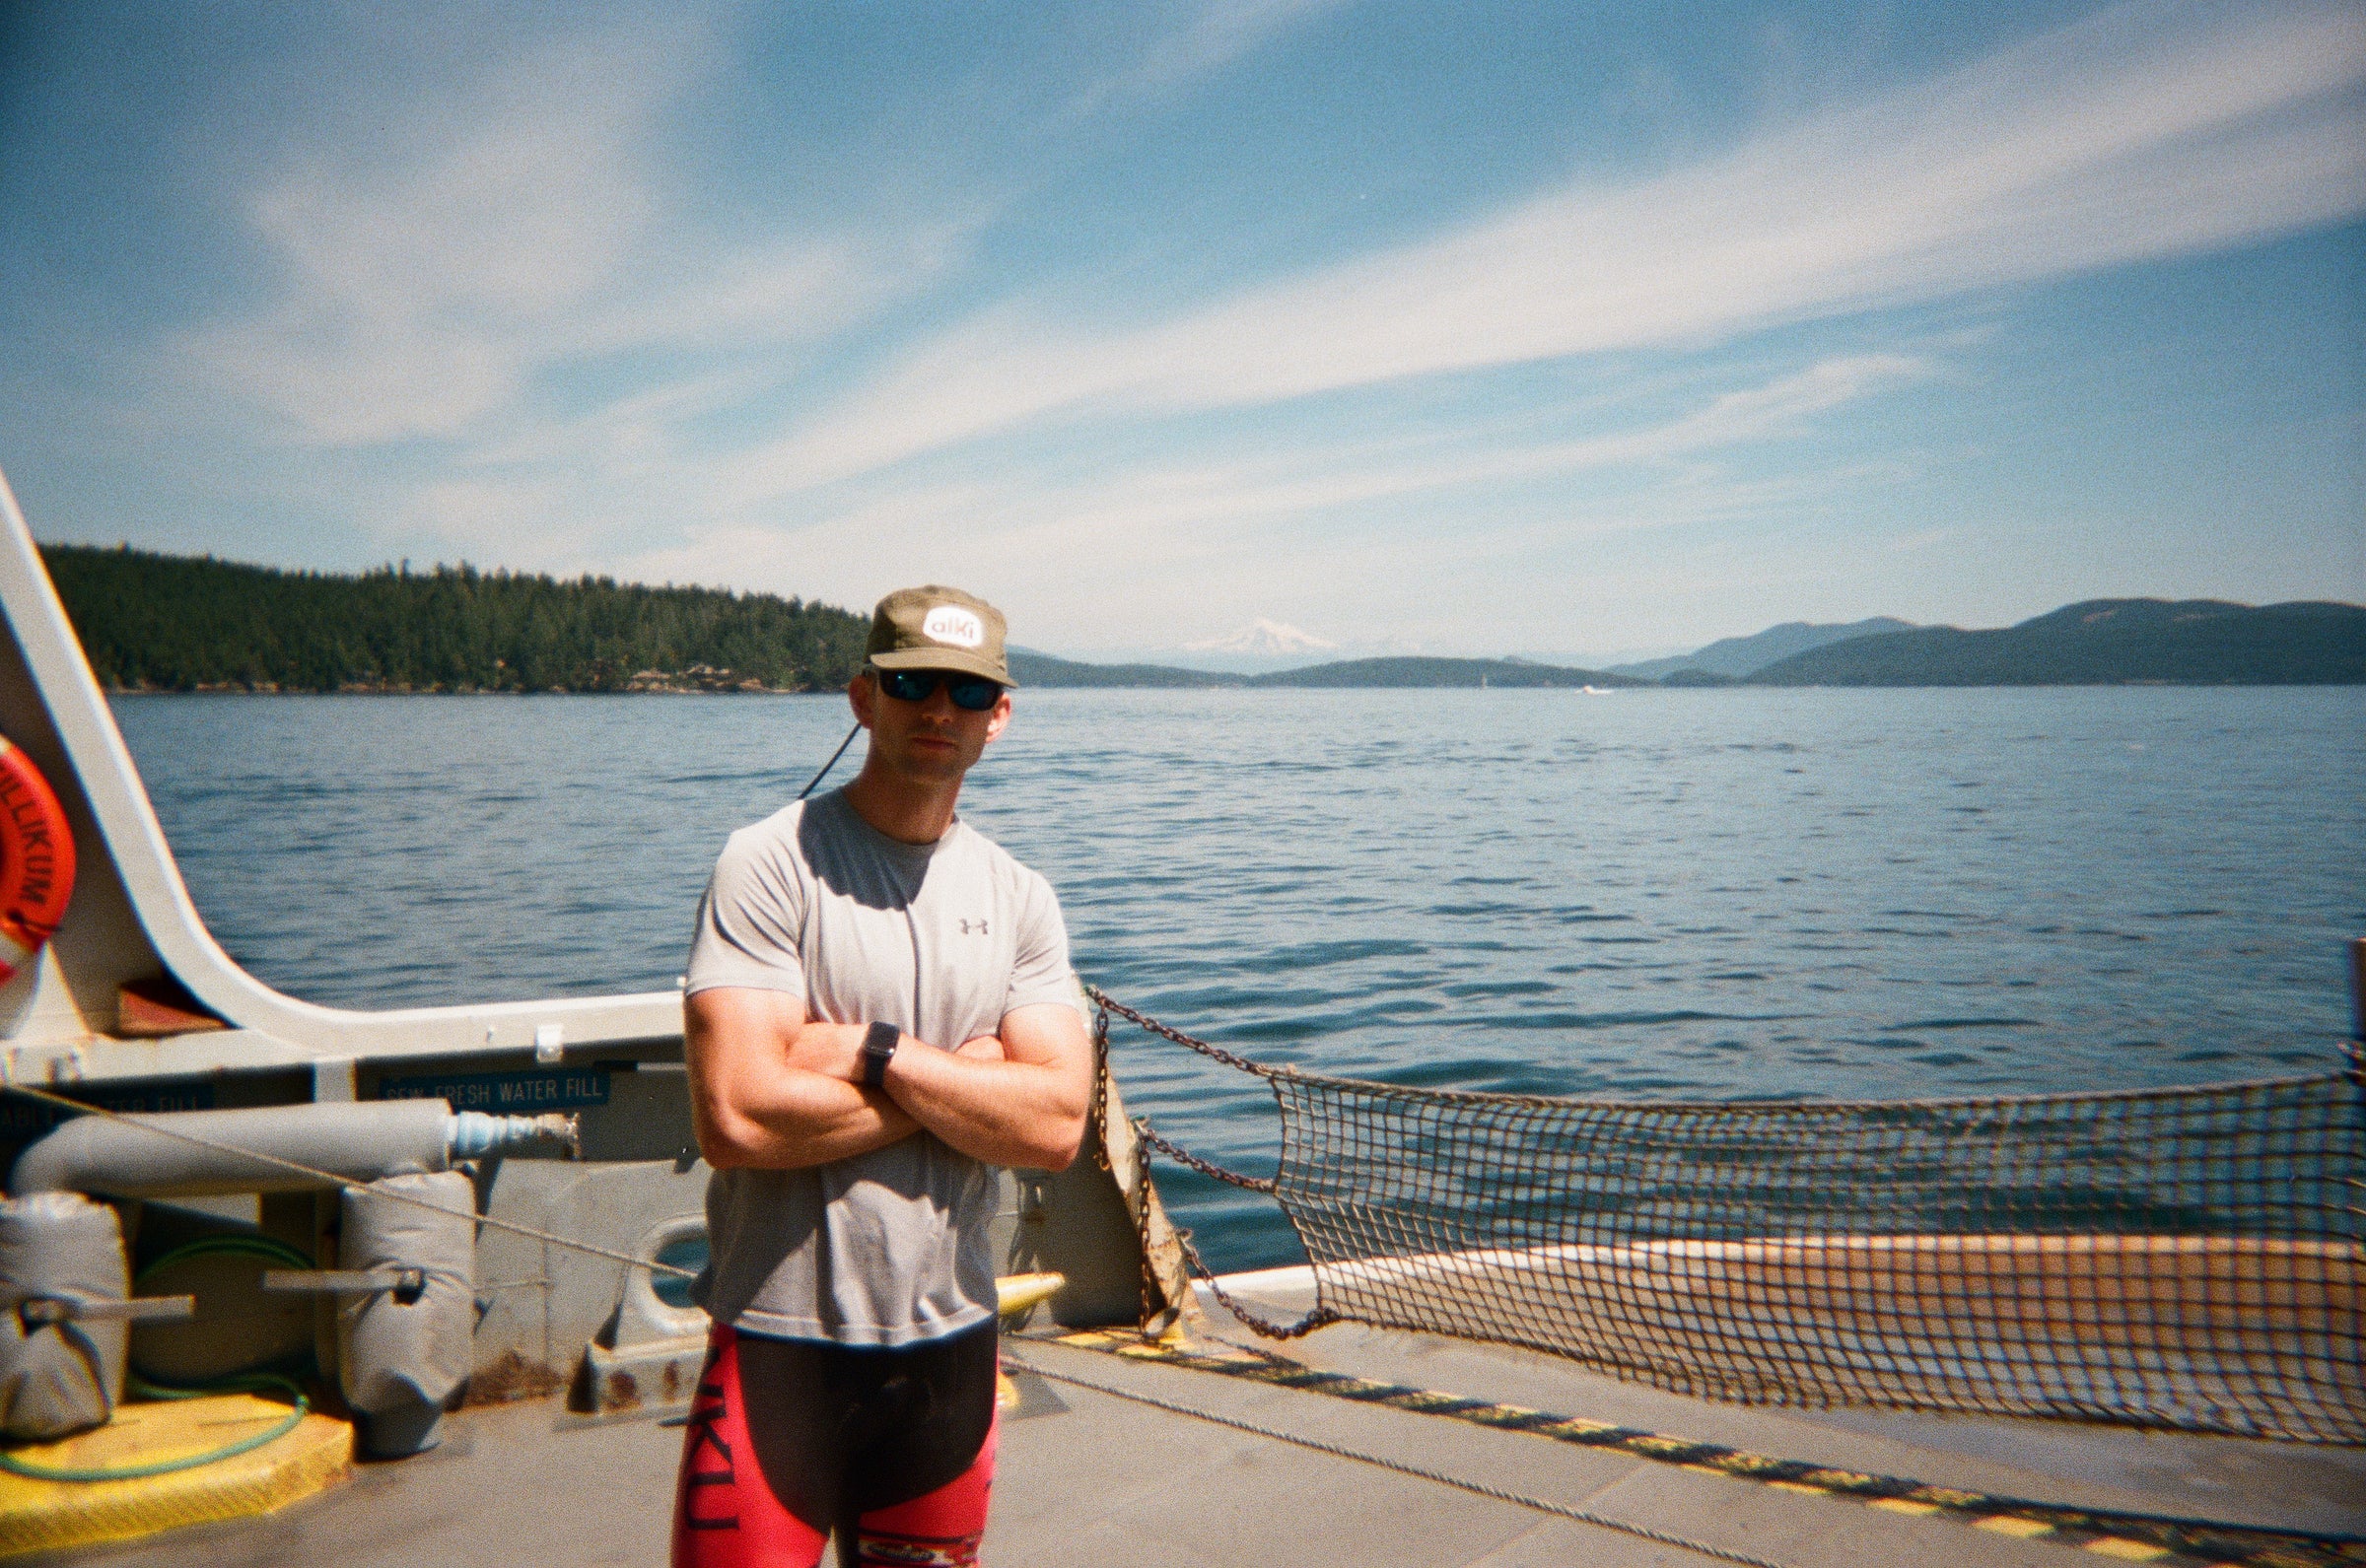 Chaz wearing his Alki Supply hat on the ferry with Mt. Baker in the distance